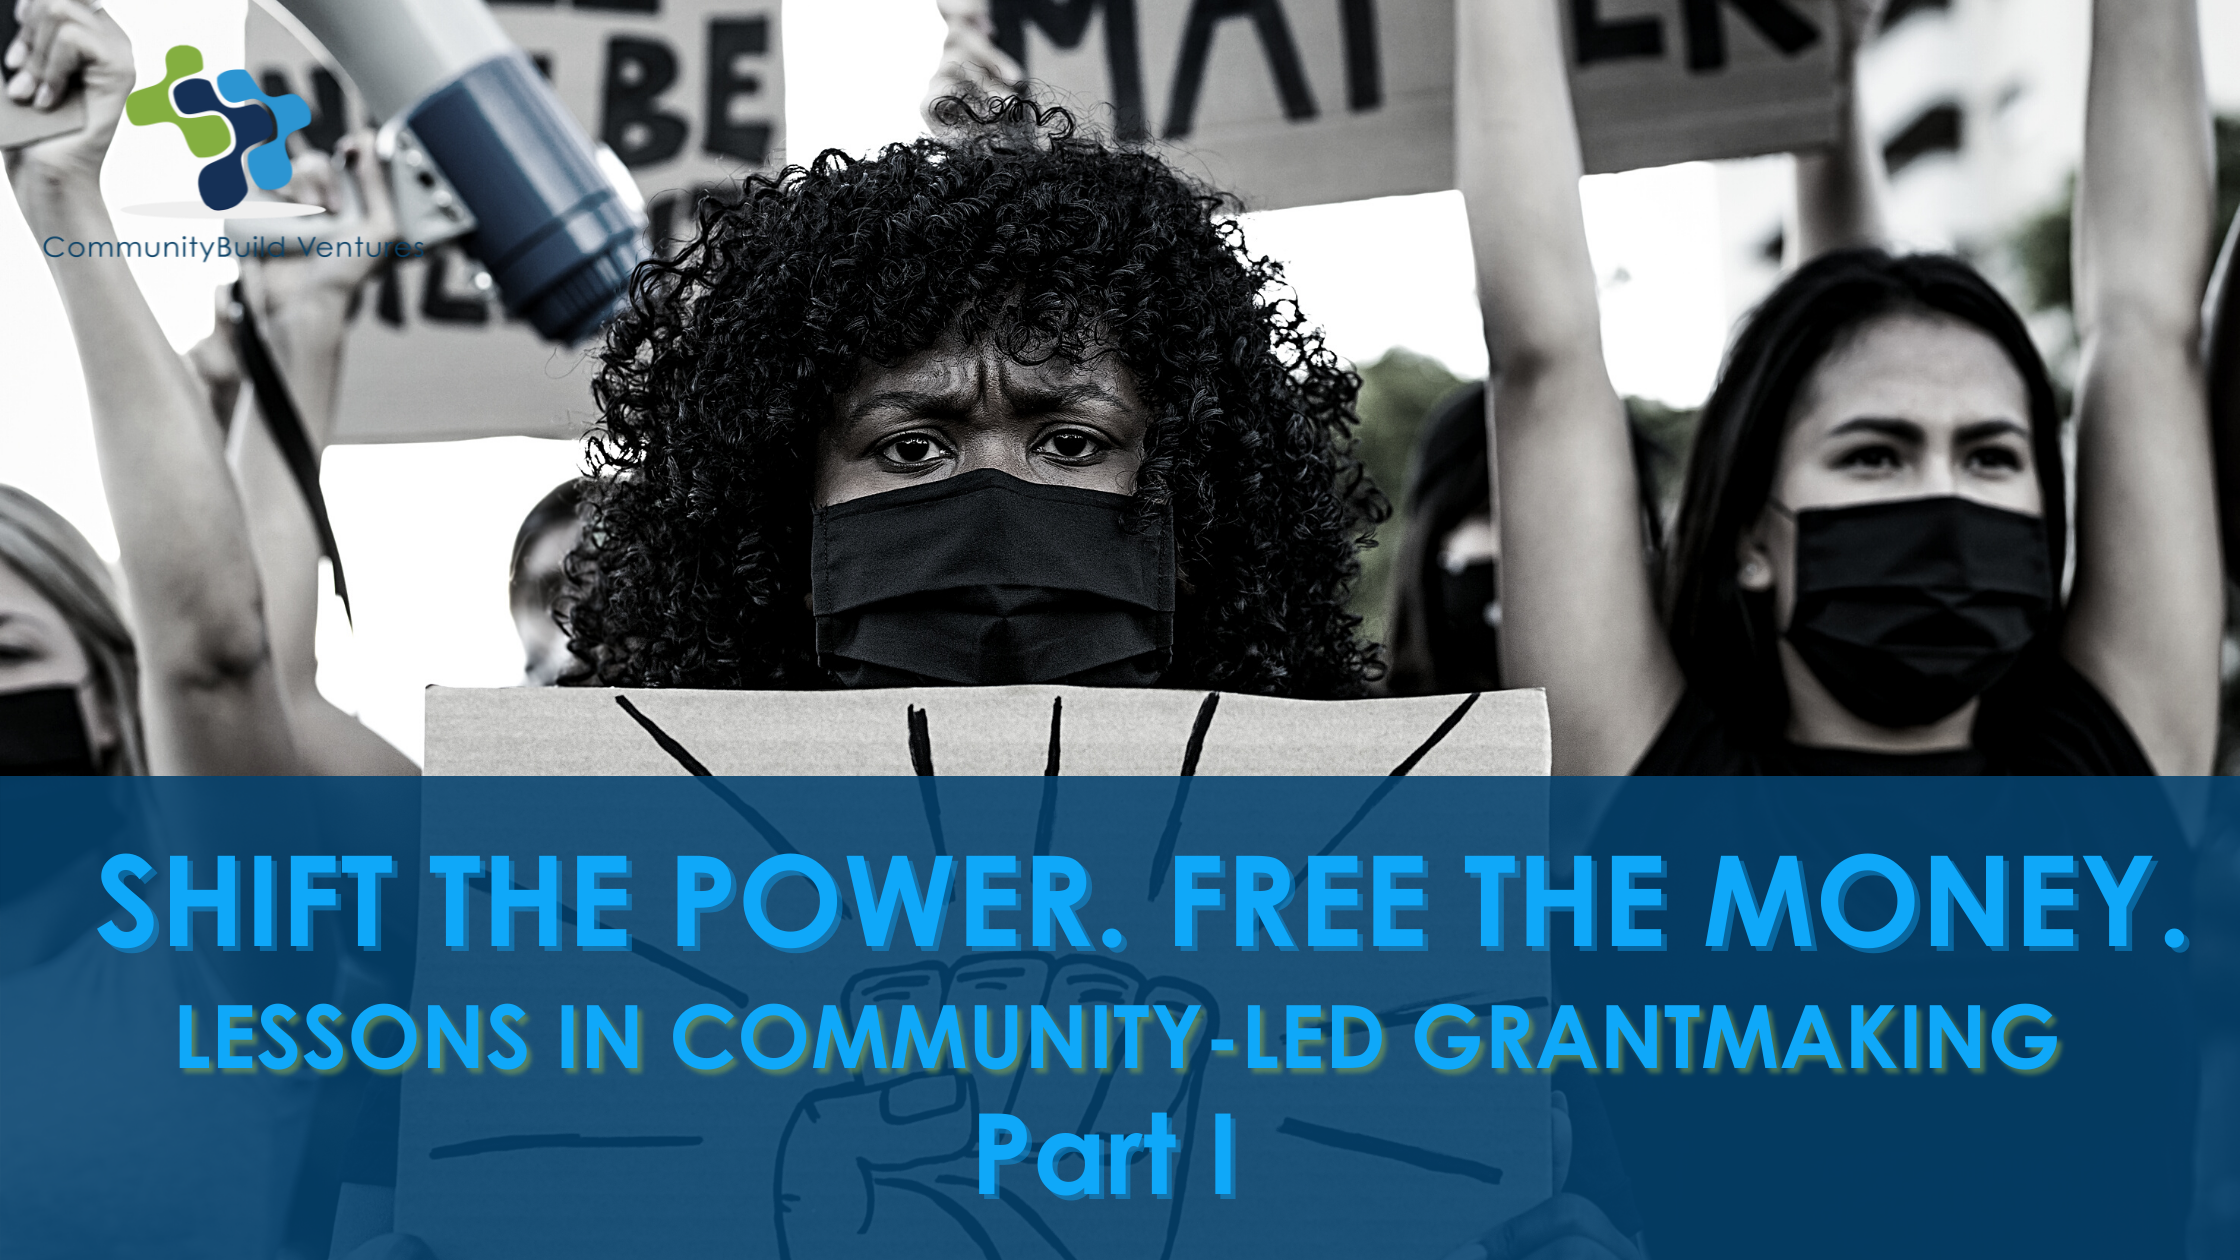 Shift the Power. Free the Money. Lessons in Community-led Grantmaking